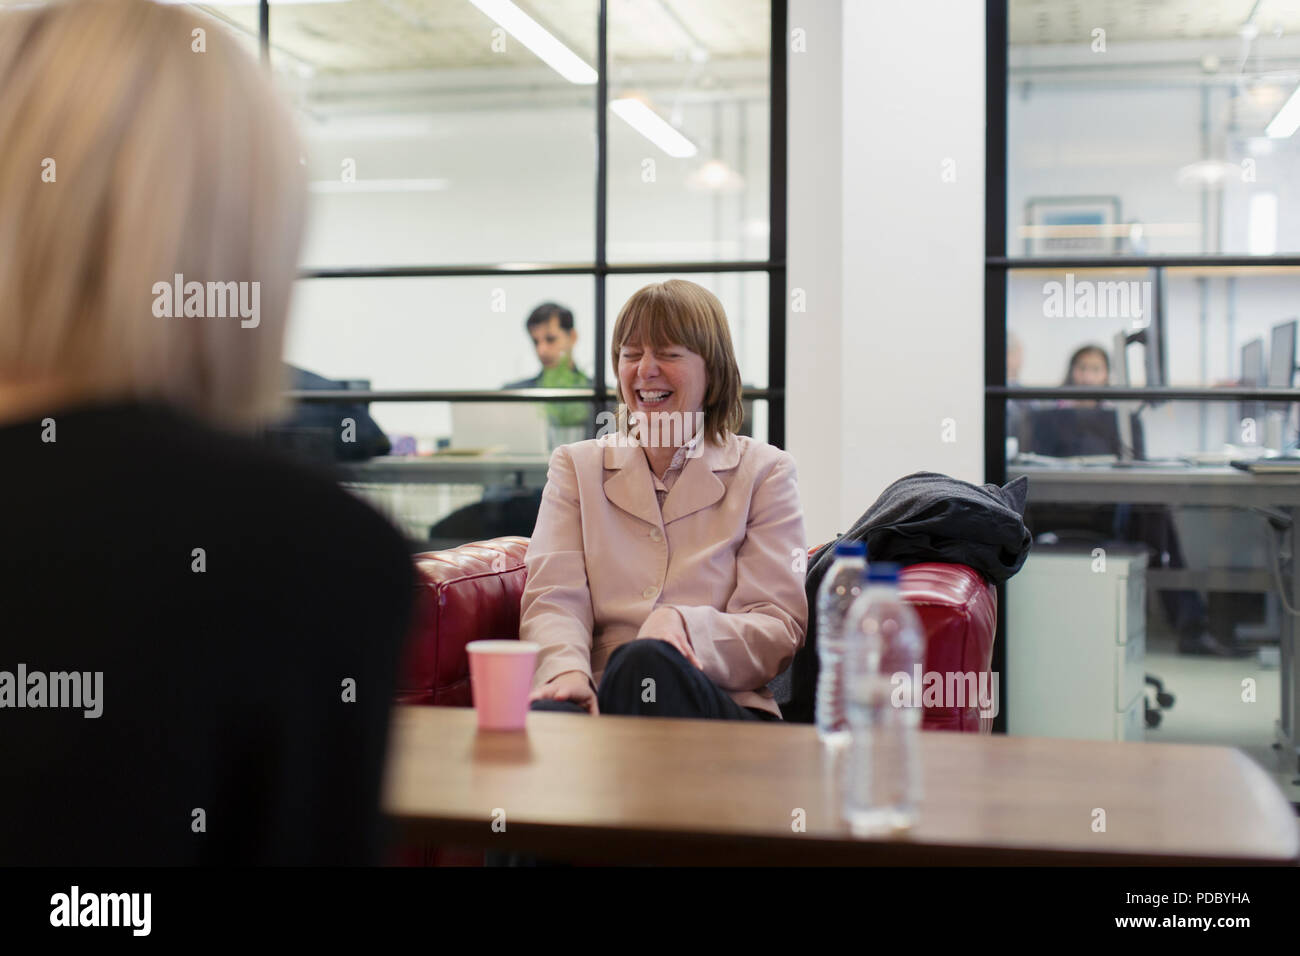 Laughing businesswoman in meeting Stock Photo